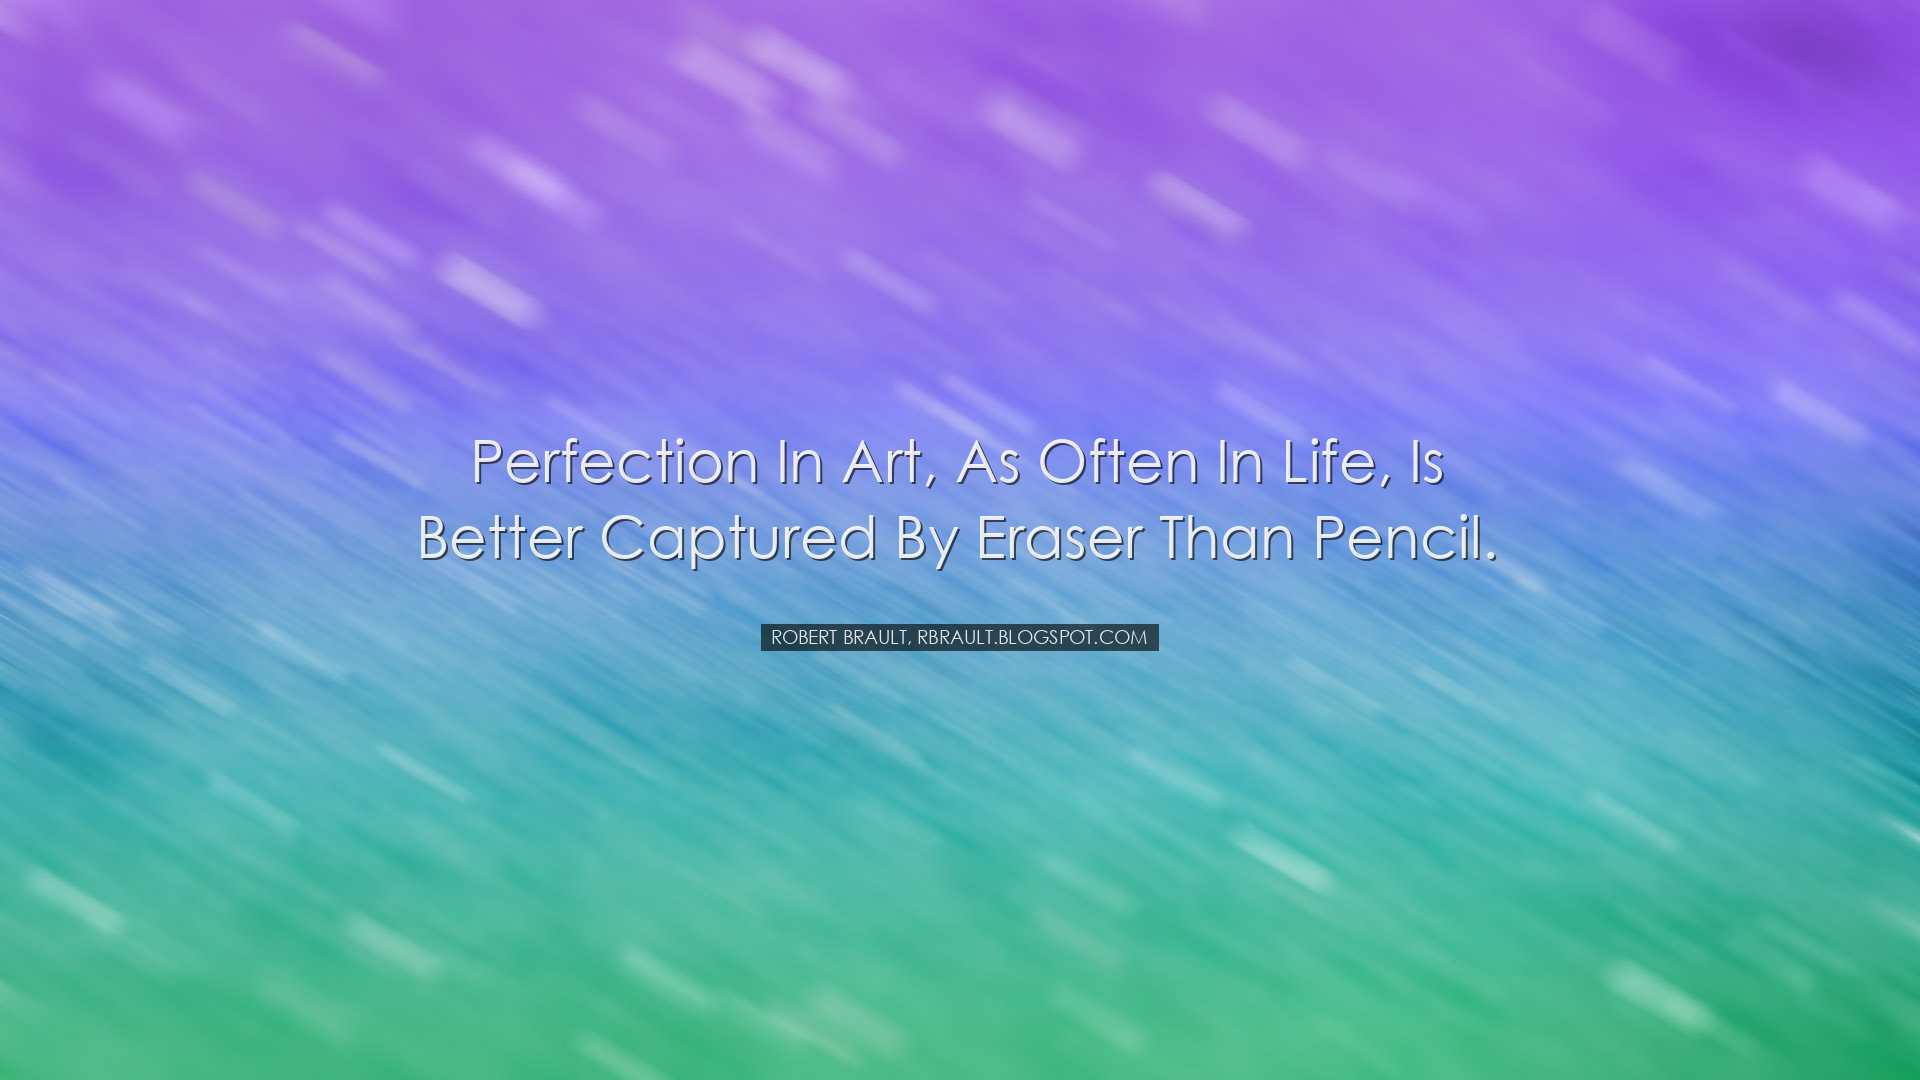 Perfection in art, as often in life, is better captured by eraser